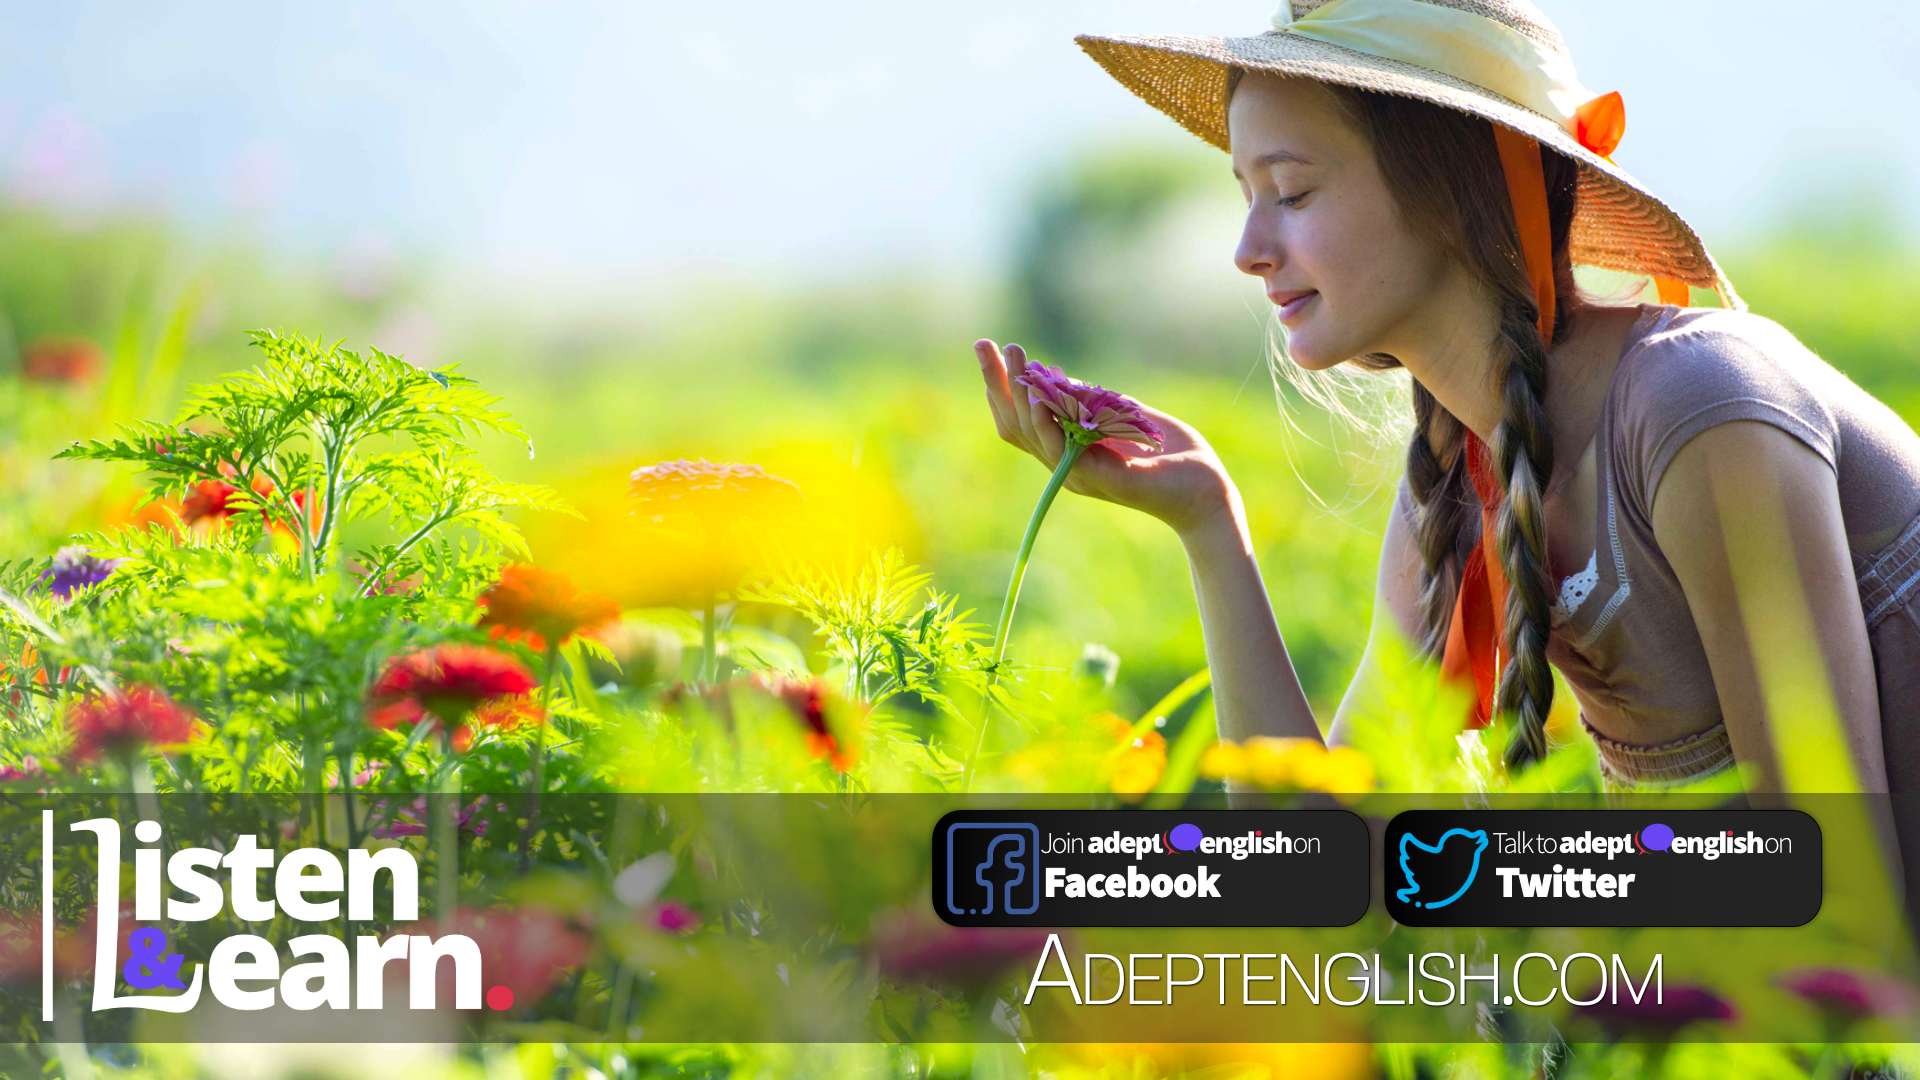 Summer on an organic farm. A young woman in a field of flowers, the cover images used for this ESL English grammar lesson.